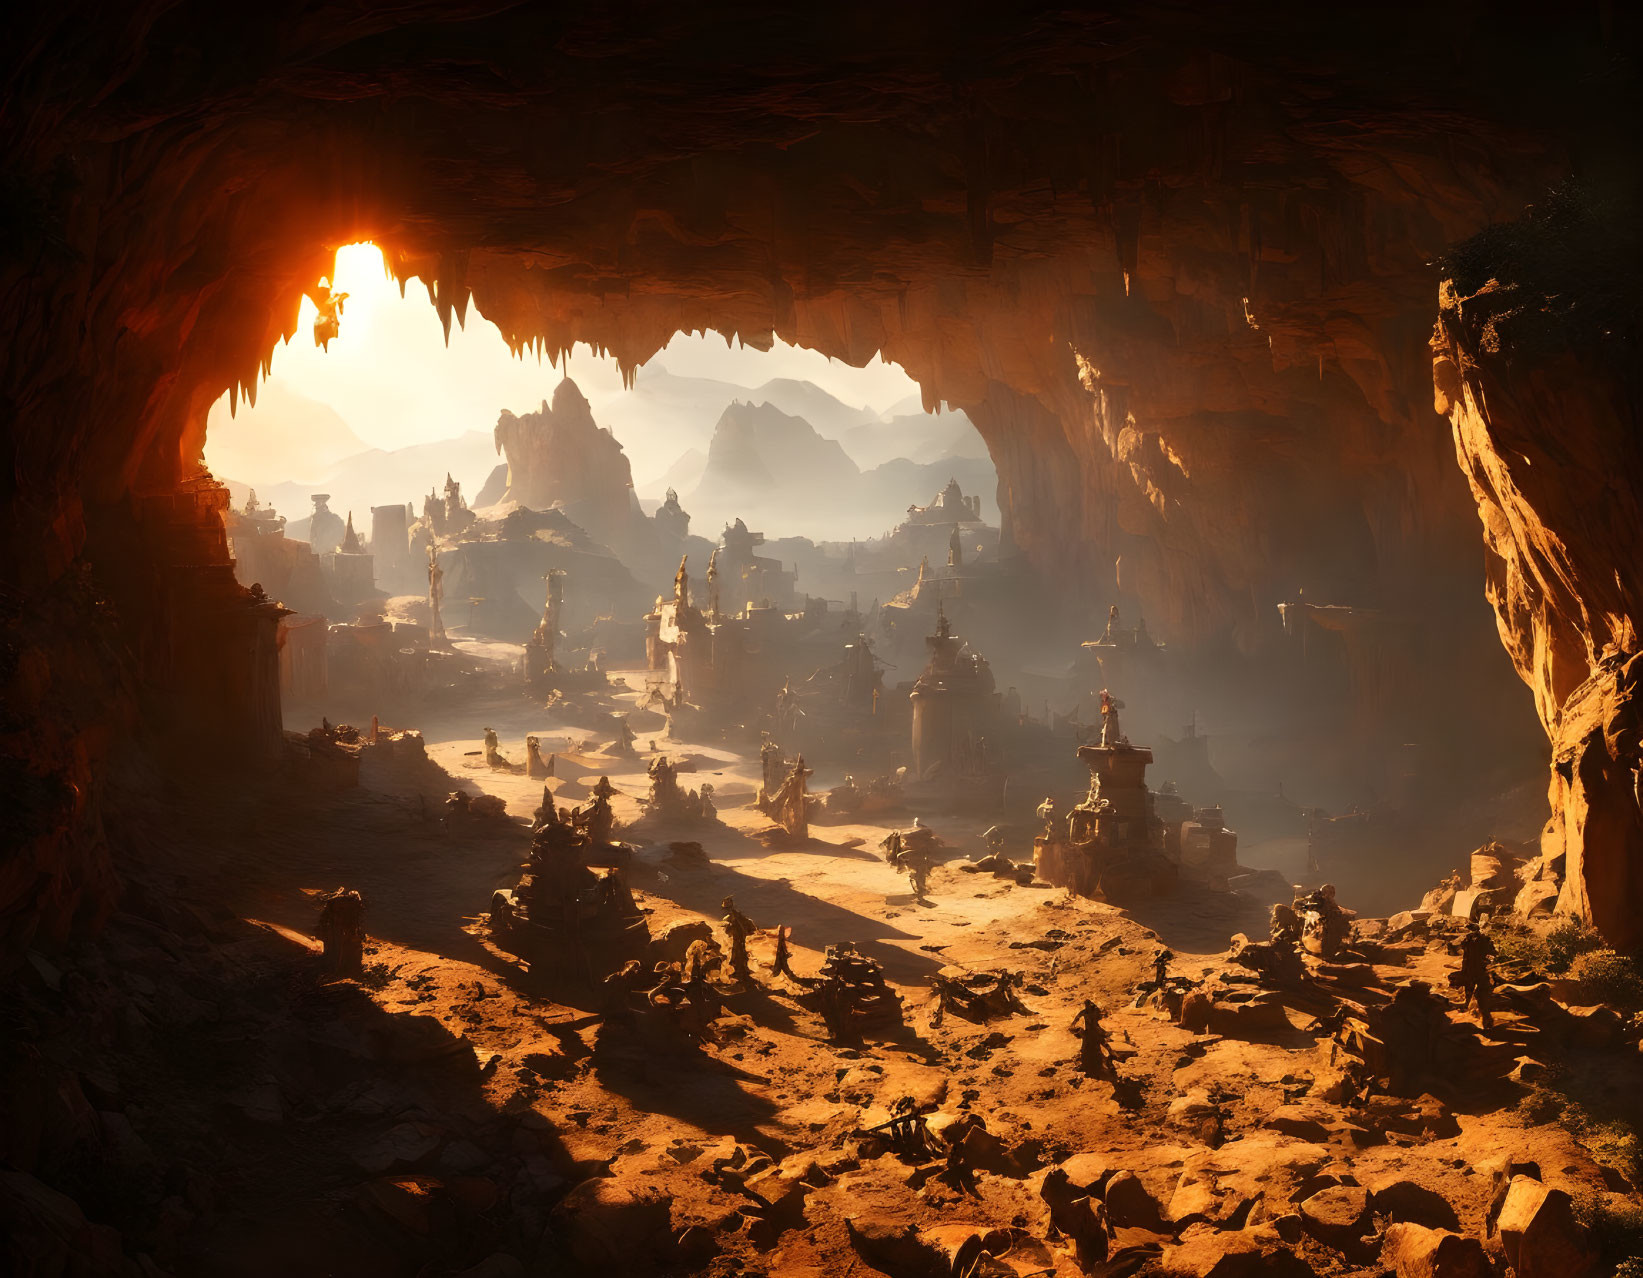 Mystical landscape with rocky spires and ancient ruins in vast cavern